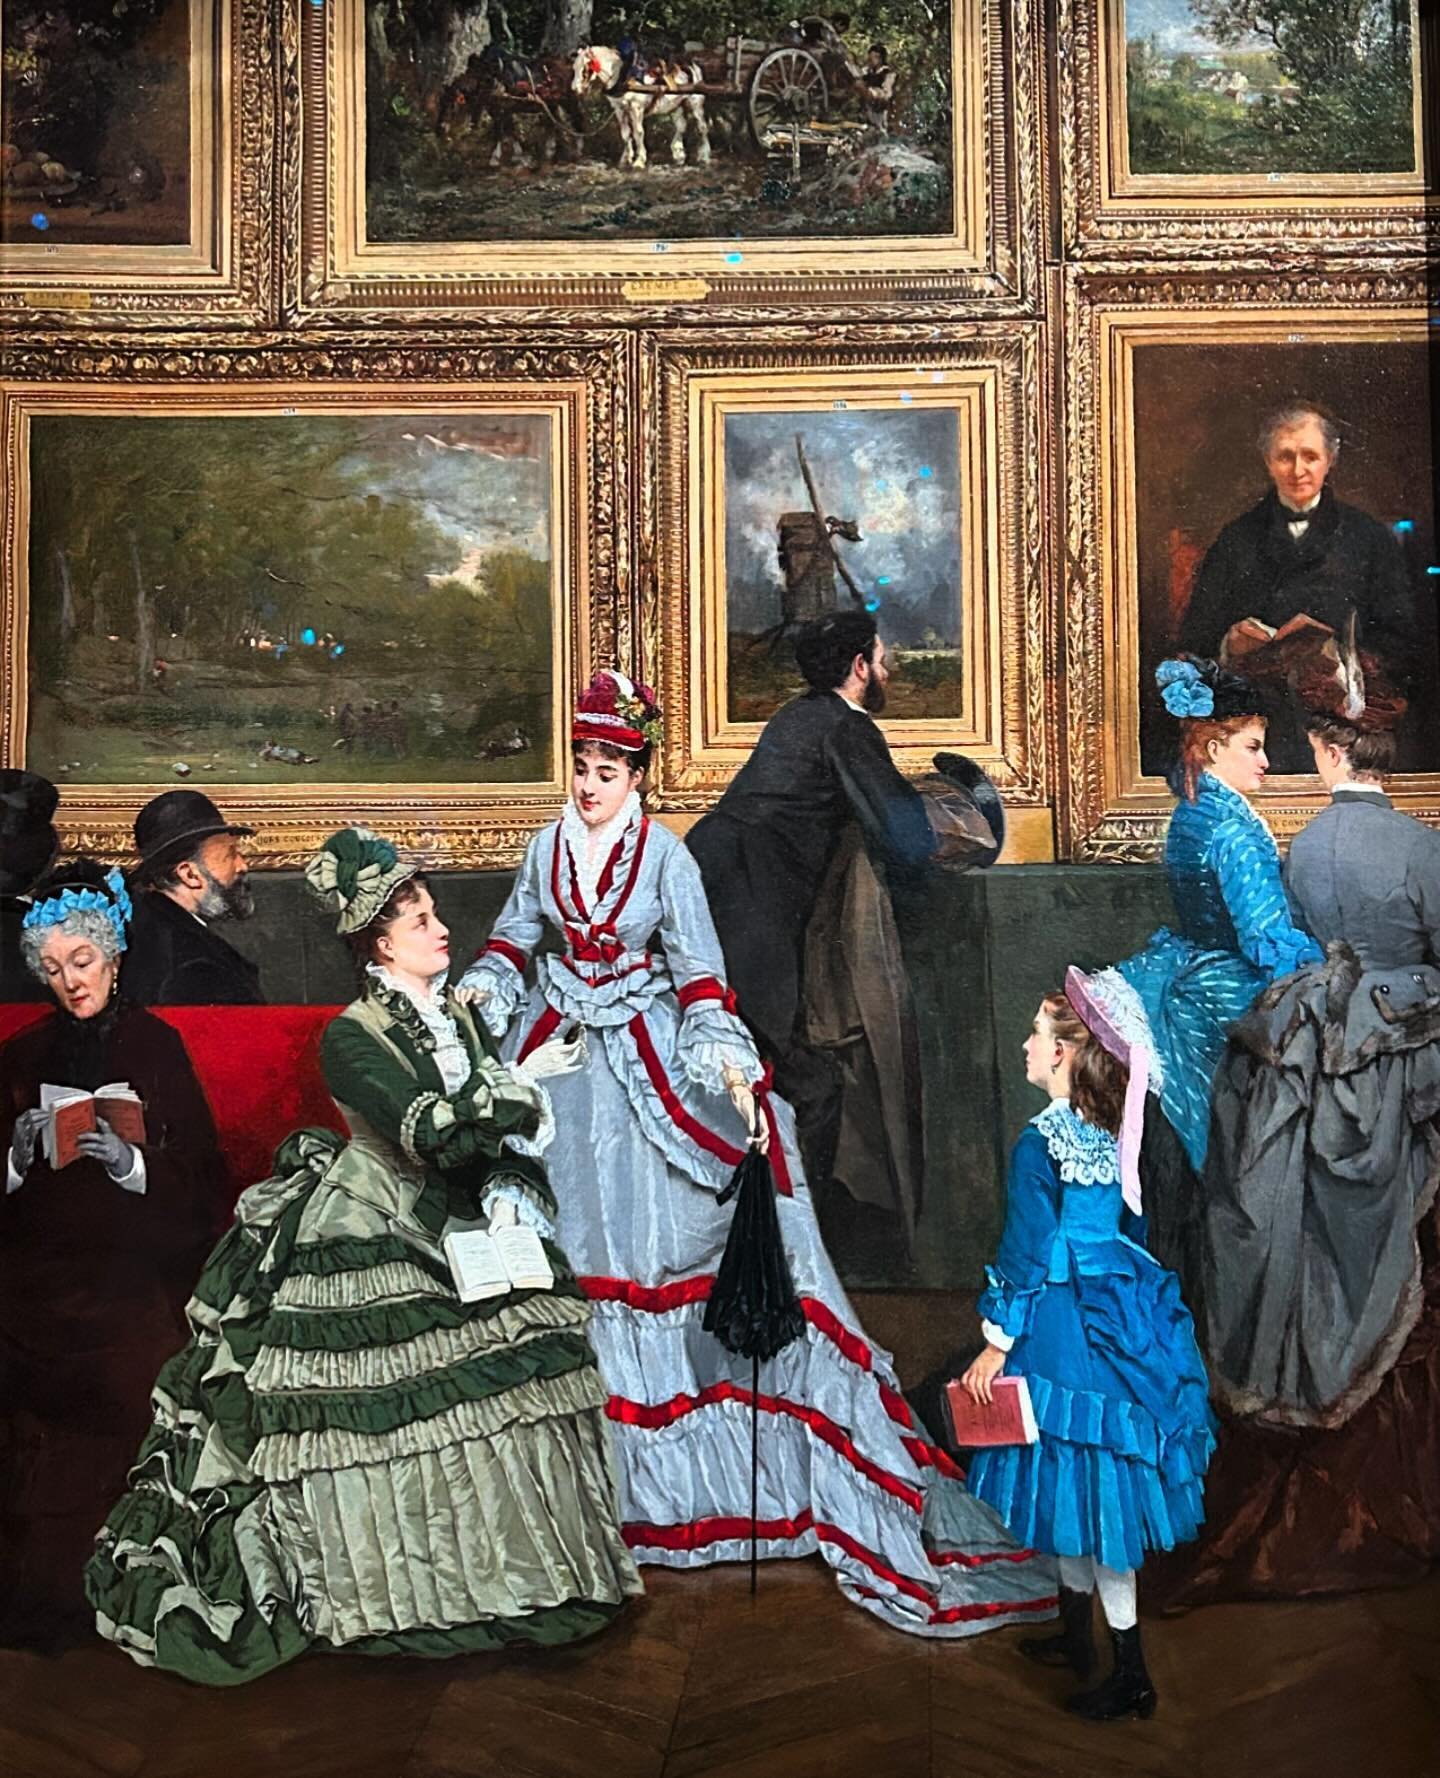 Camille Cabaillot-Lassalle, The Salon of 1874. As seen in #Paris1874 at #museedorsay 150 years ago today the Impressionists took on the Salon by mounting their first independent exhibition!  #impressionism #150impressionisme #firstimpressions 😉